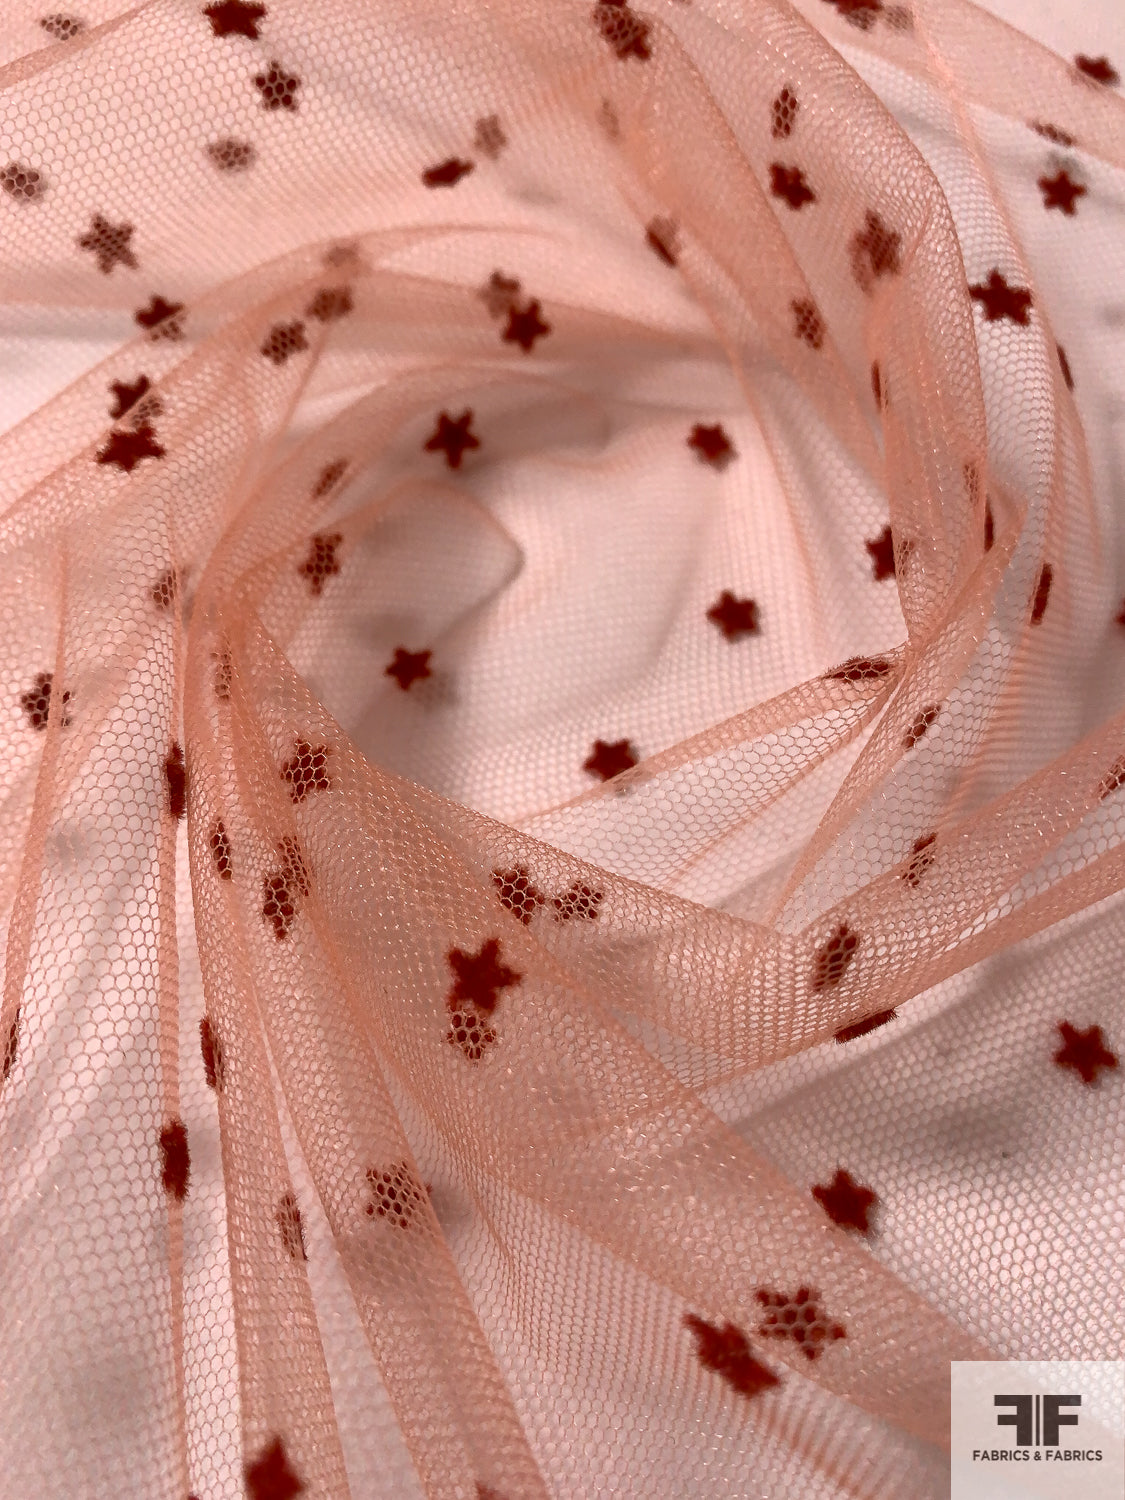 Made in France Star Design Flocked Tulle - Brick Red / Dusty Peach